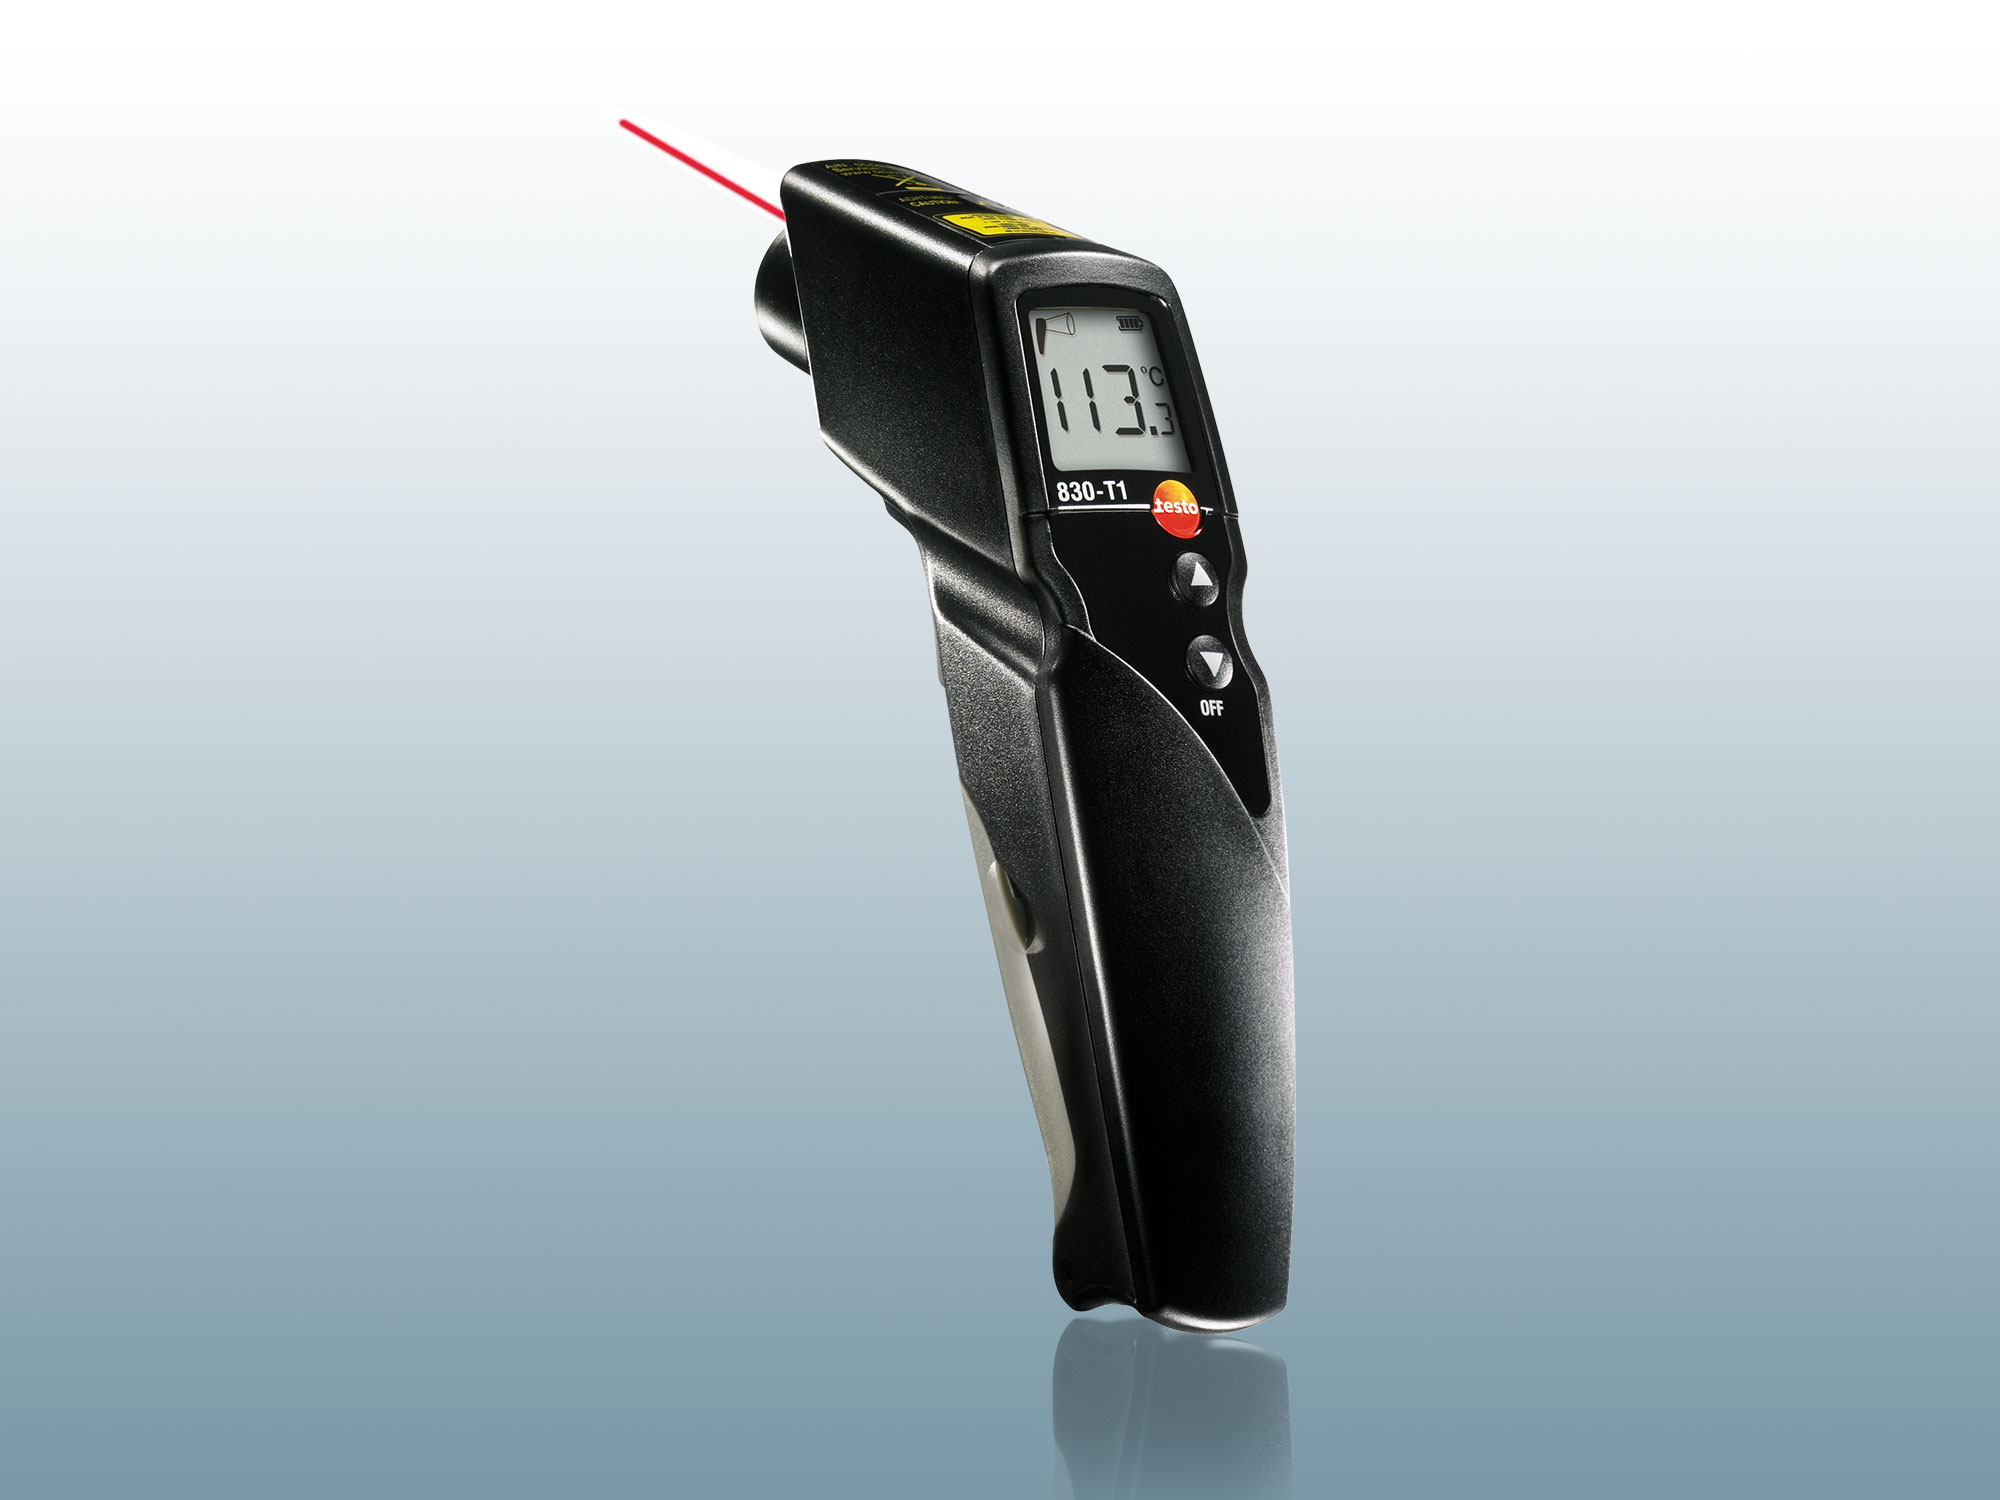 Temperature measuring instruments from the market leader